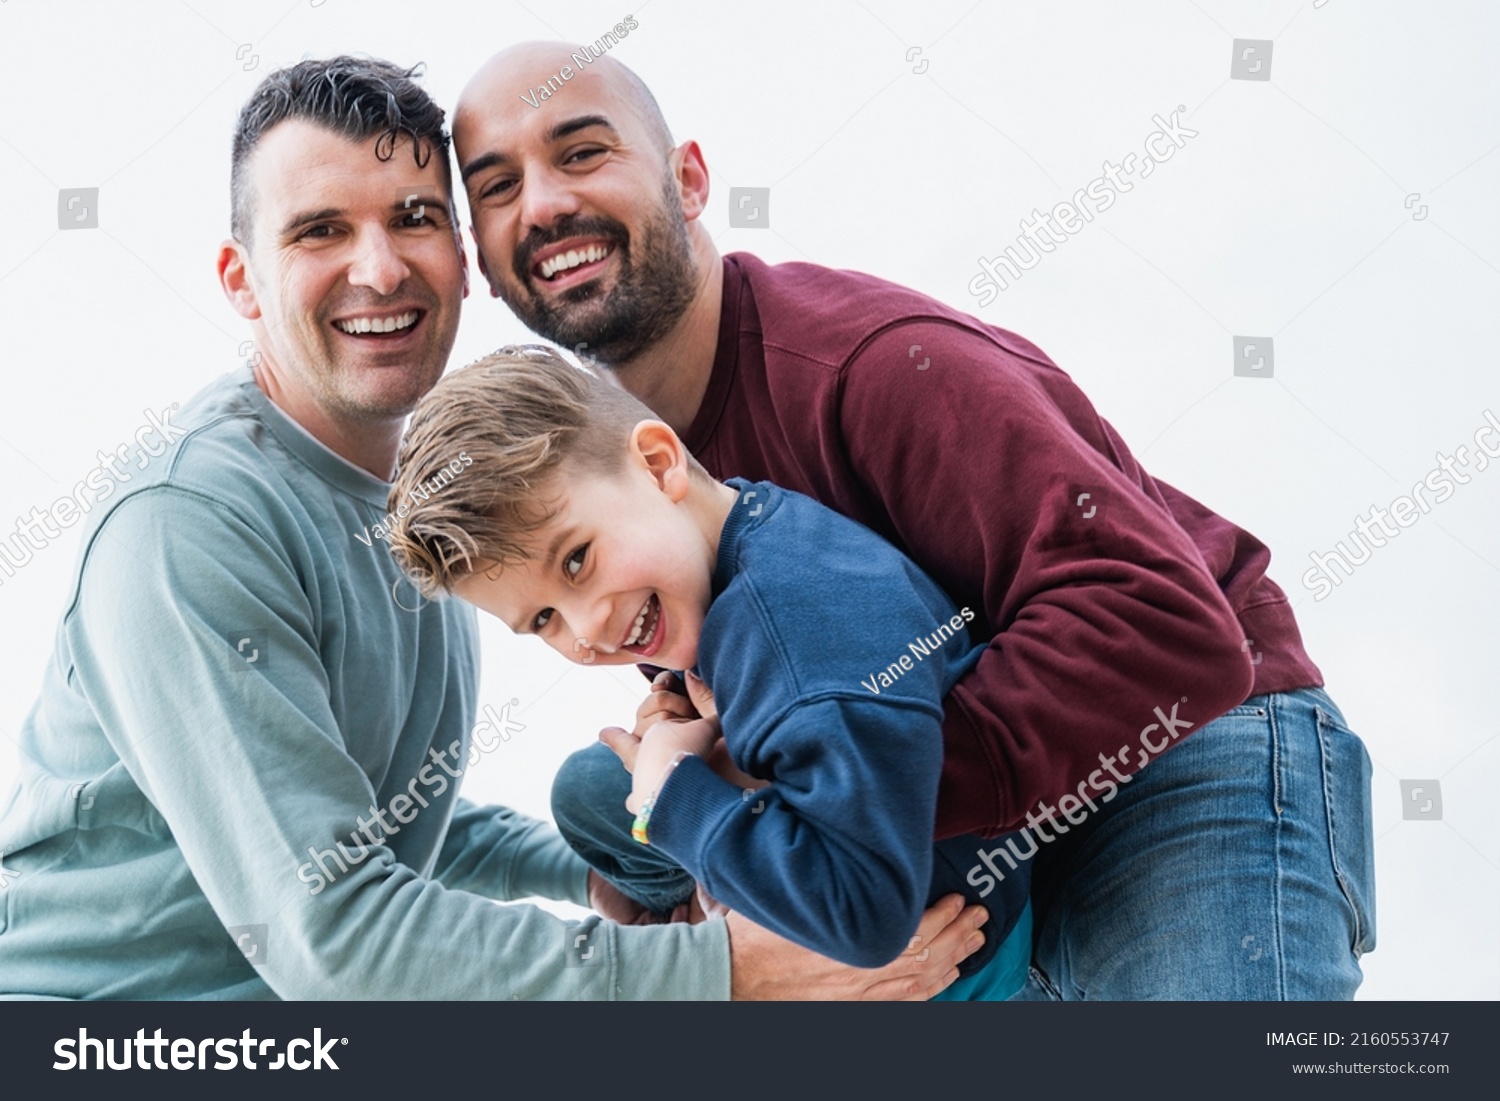 Gay fathers and son having fun together outdoor - LGBT diversity family love concept - Focus on left man face #2160553747